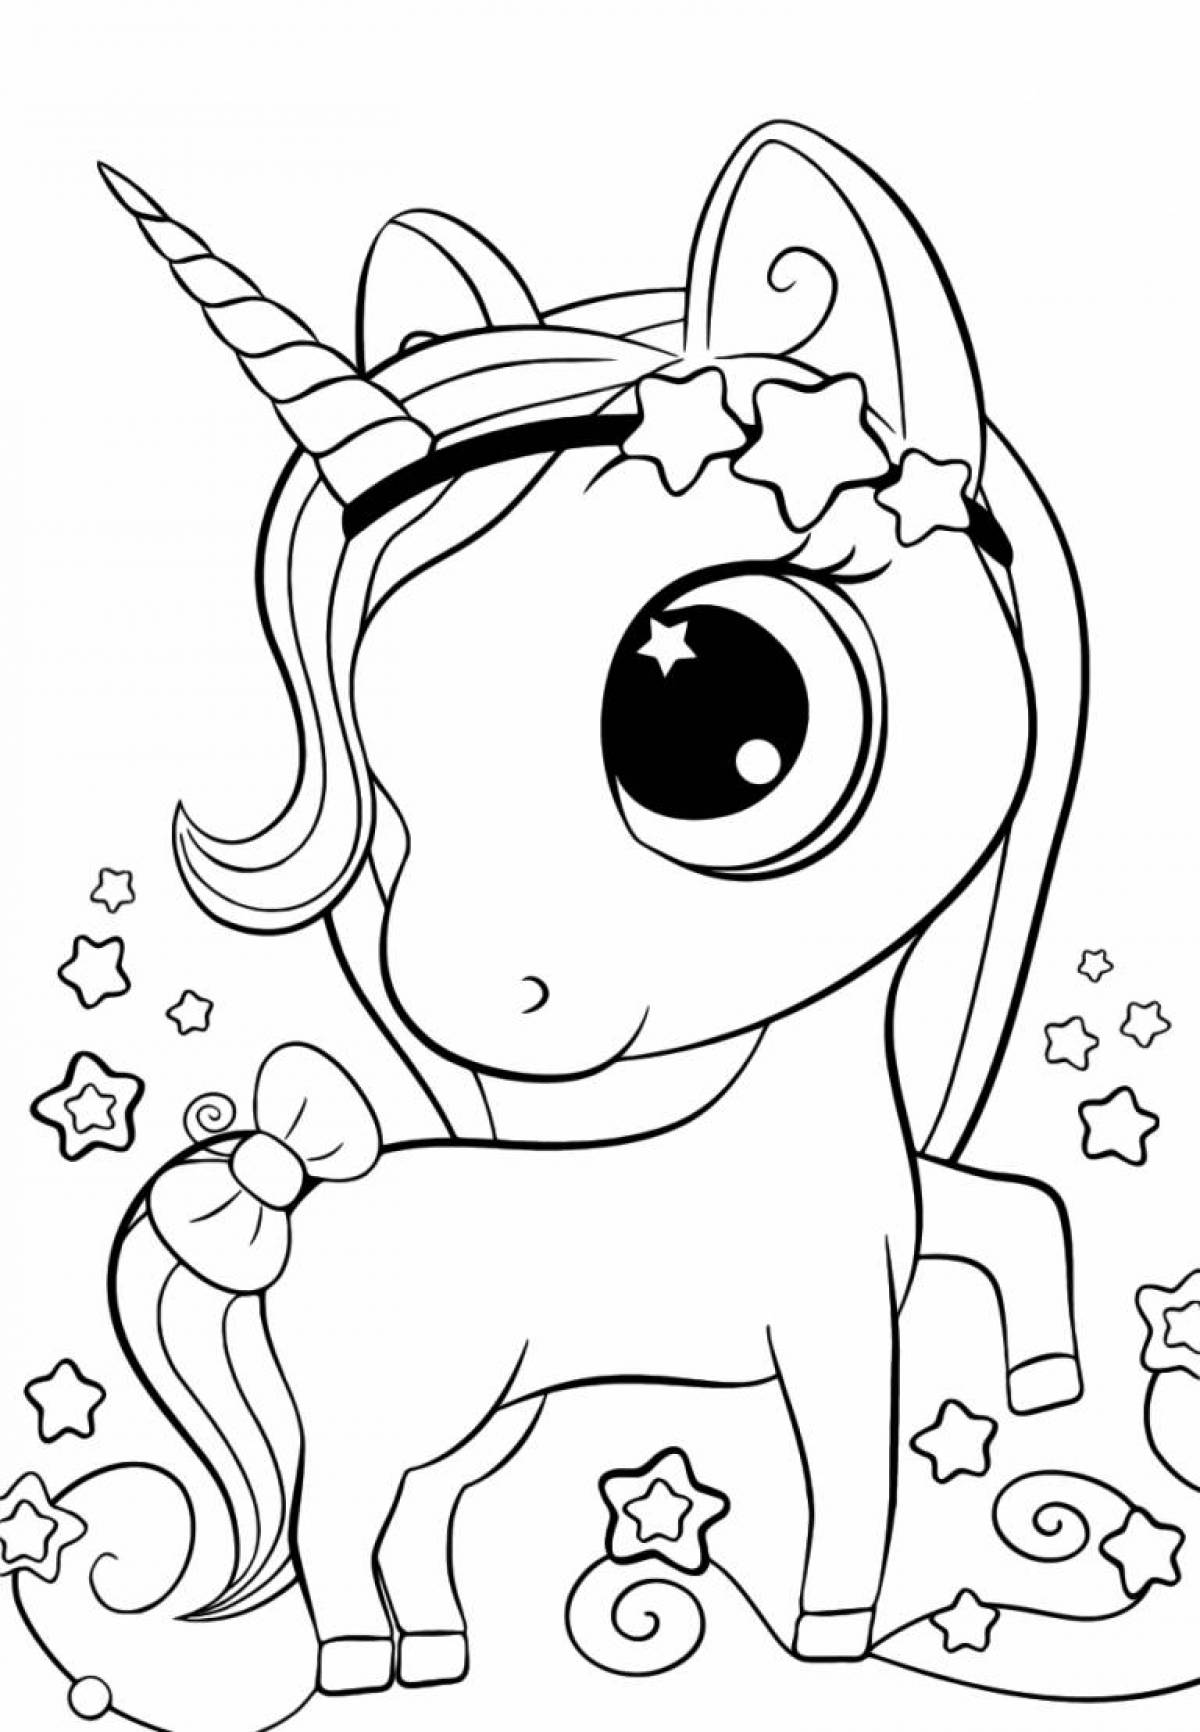 A playful unicorn coloring book for kids 6-7 years old